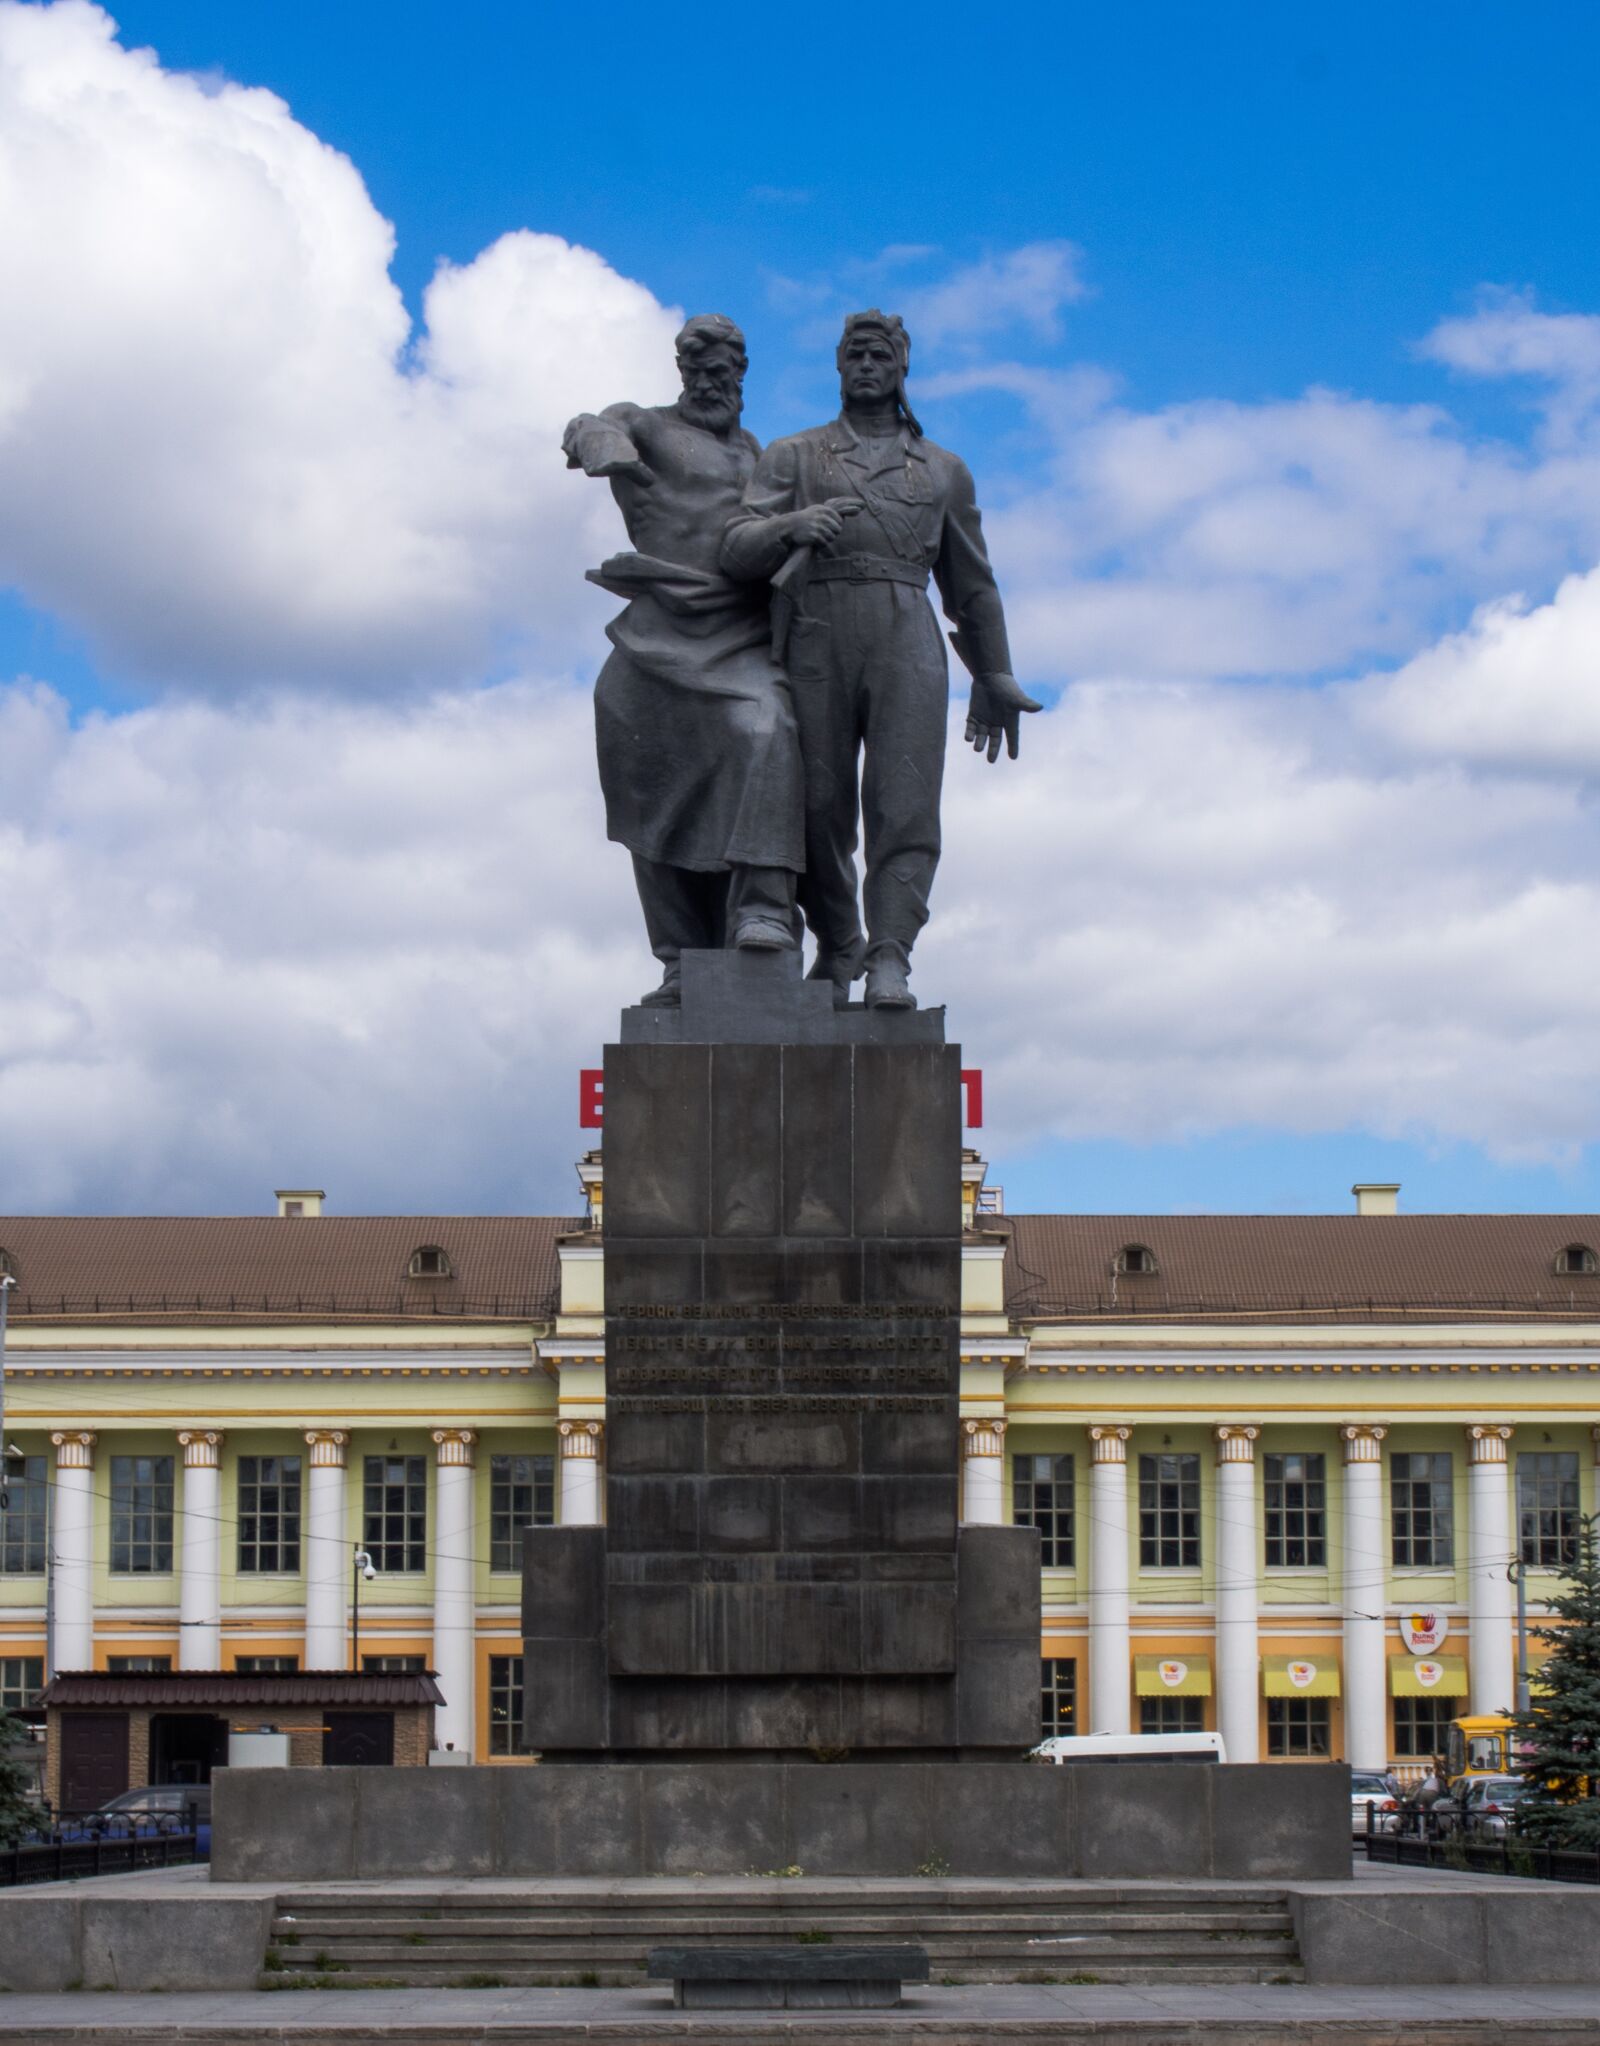 Olympus PEN E-PL5 sample photo. Russia, railway station, monument photography